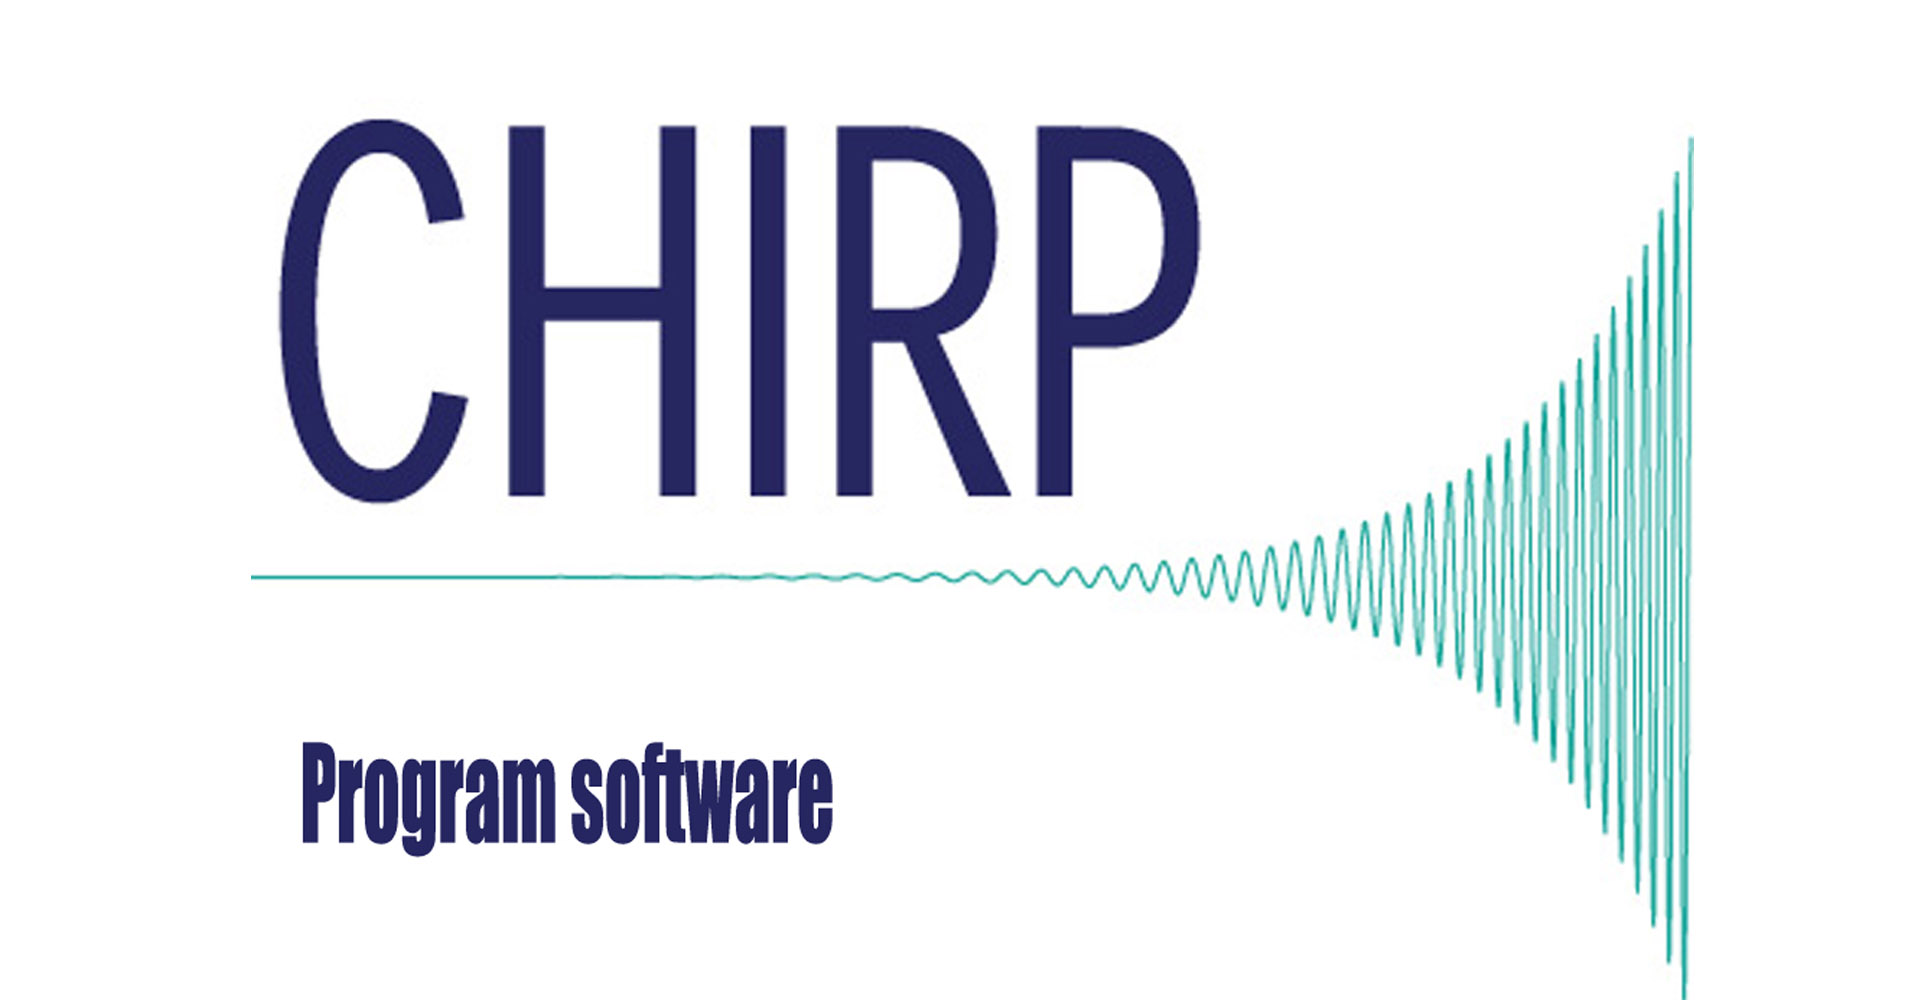 CHIRP programming software for retevis two way radios